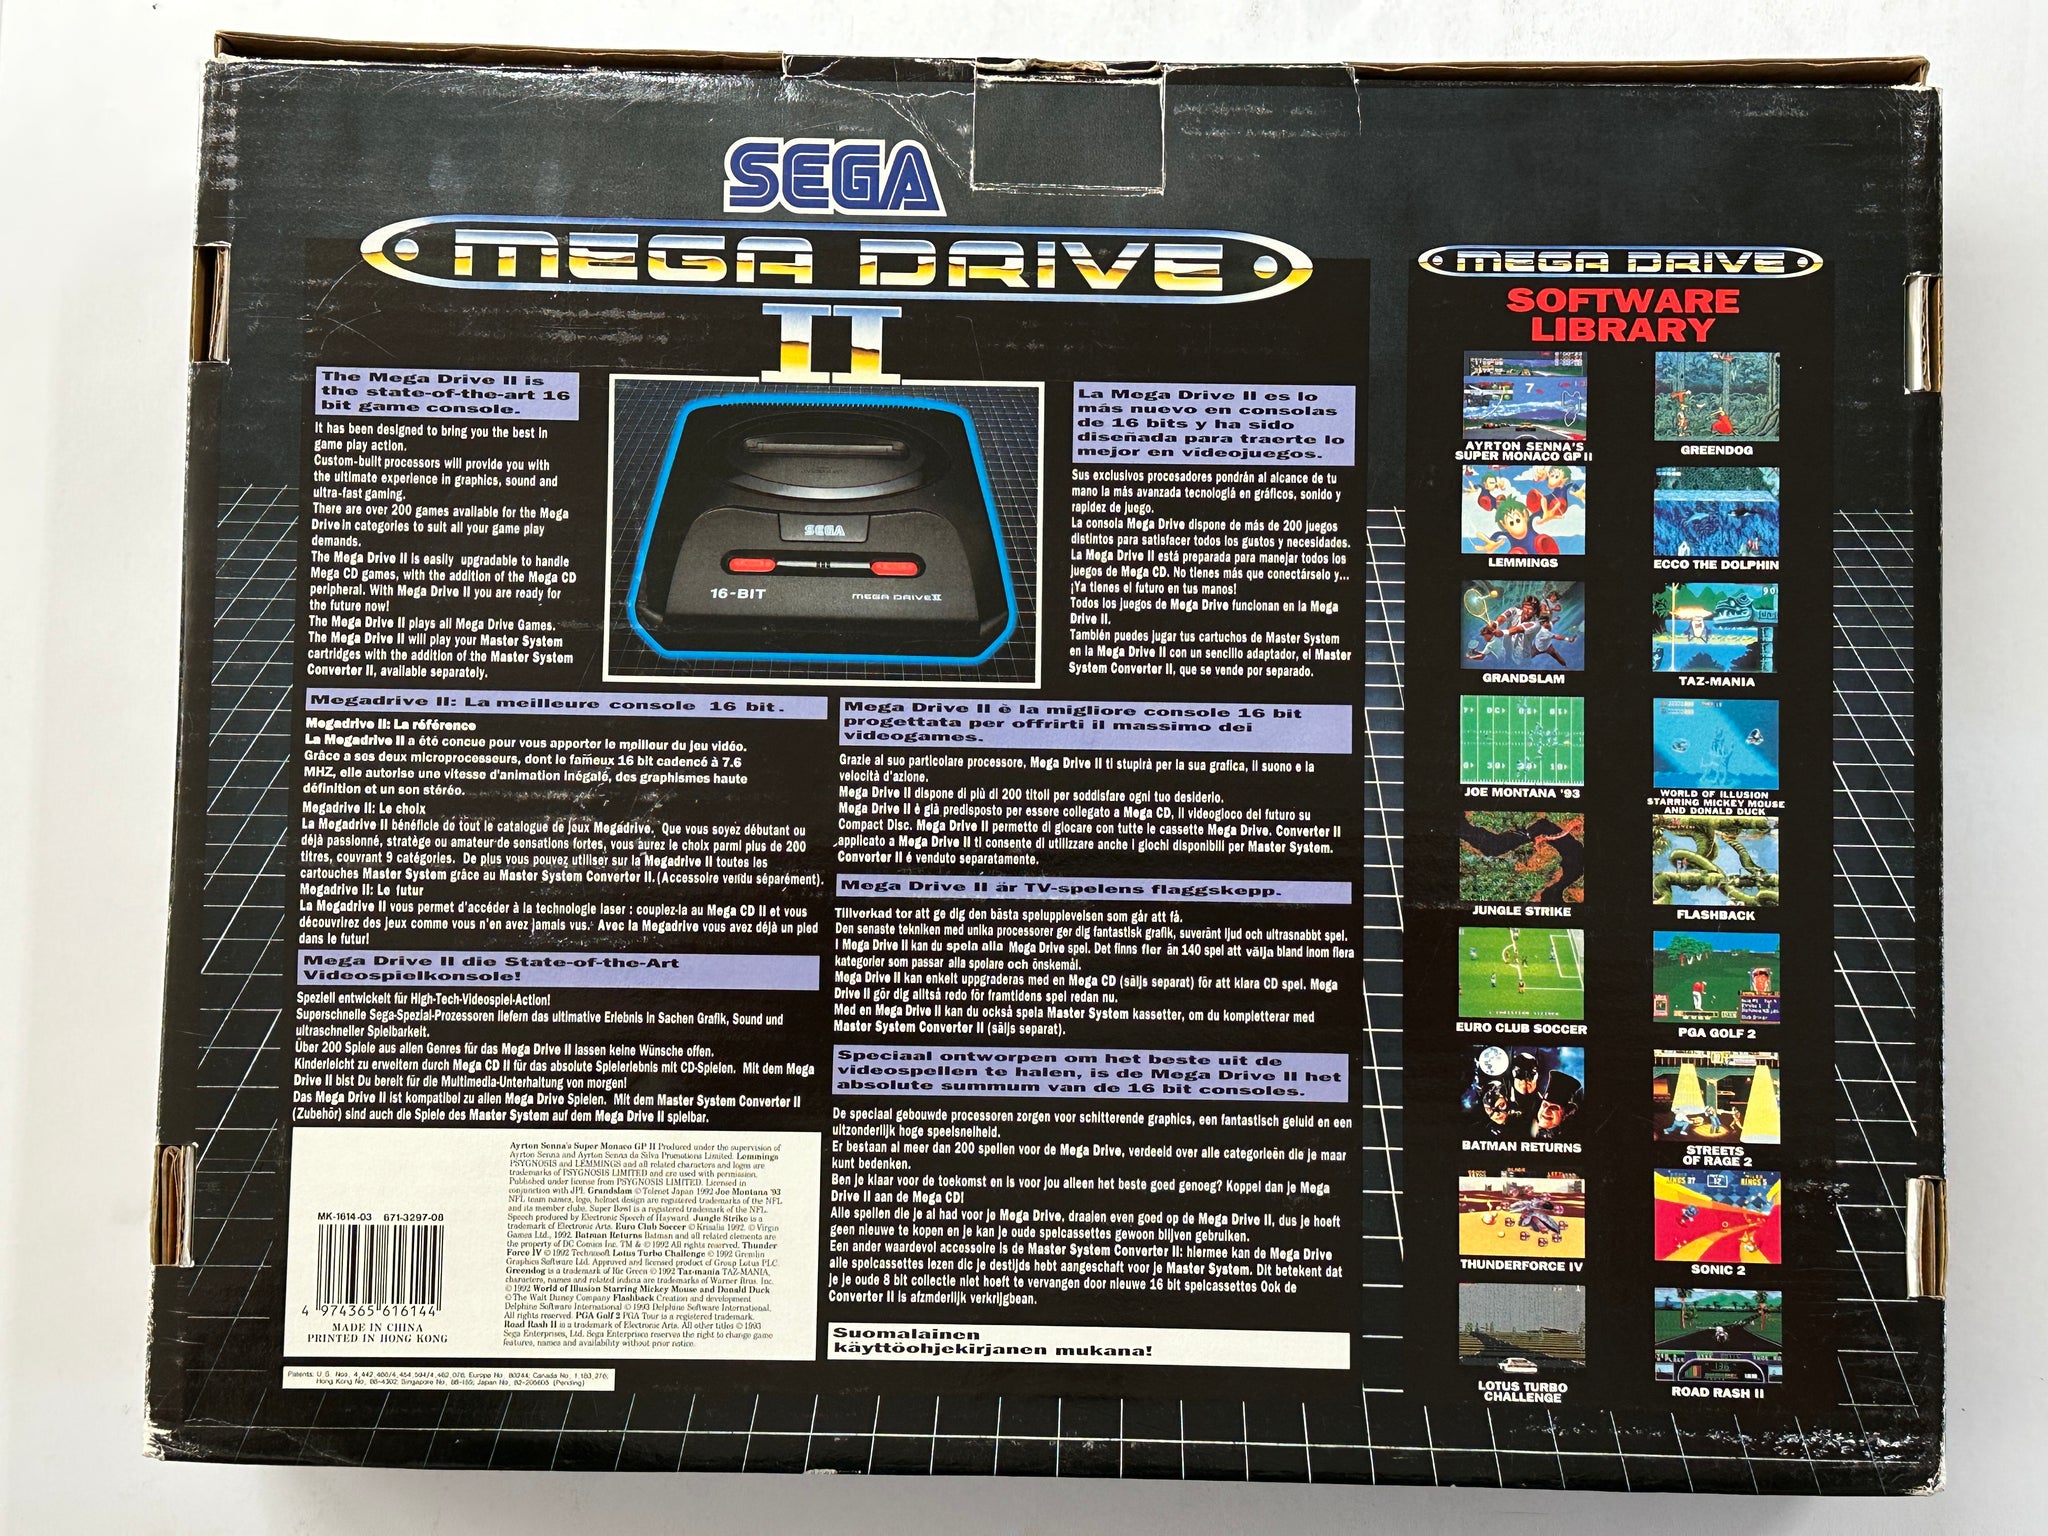 Sonic the Hedgehog 2 - Mega Drive review from Games Master Issue 1